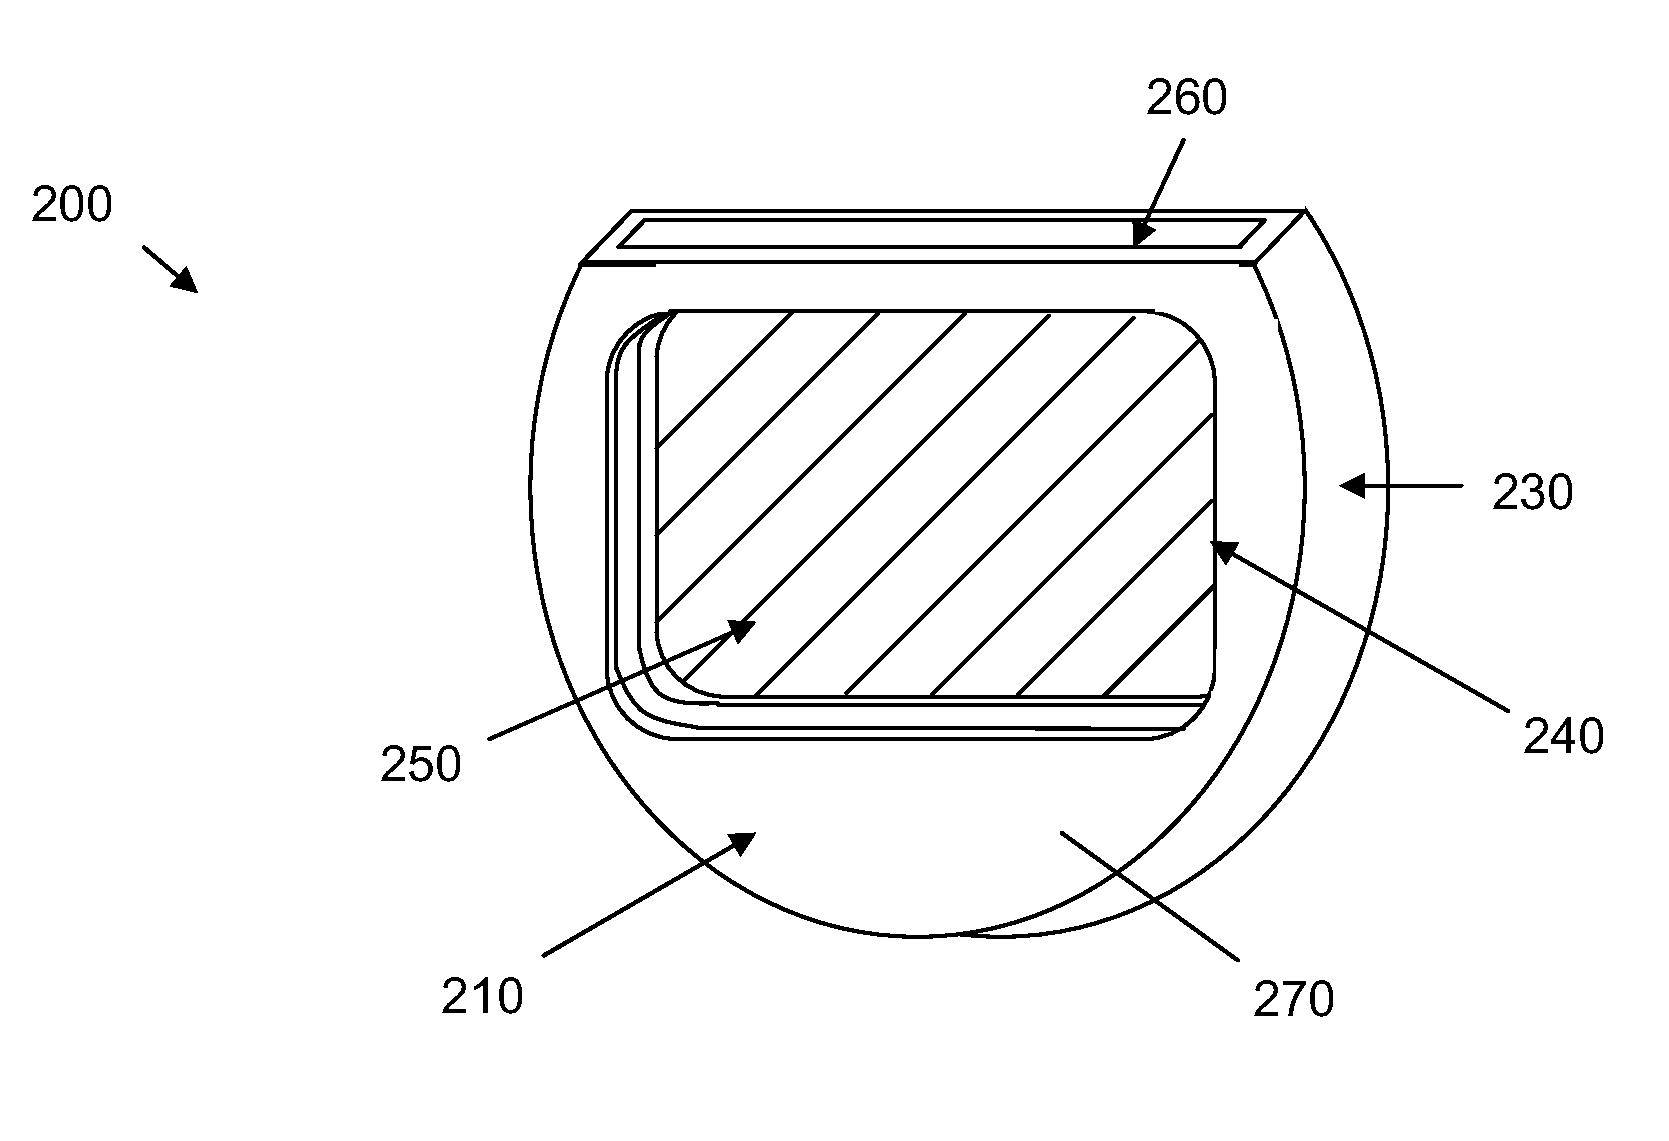 Accessory apparatus for improved recharging of implantable medical device